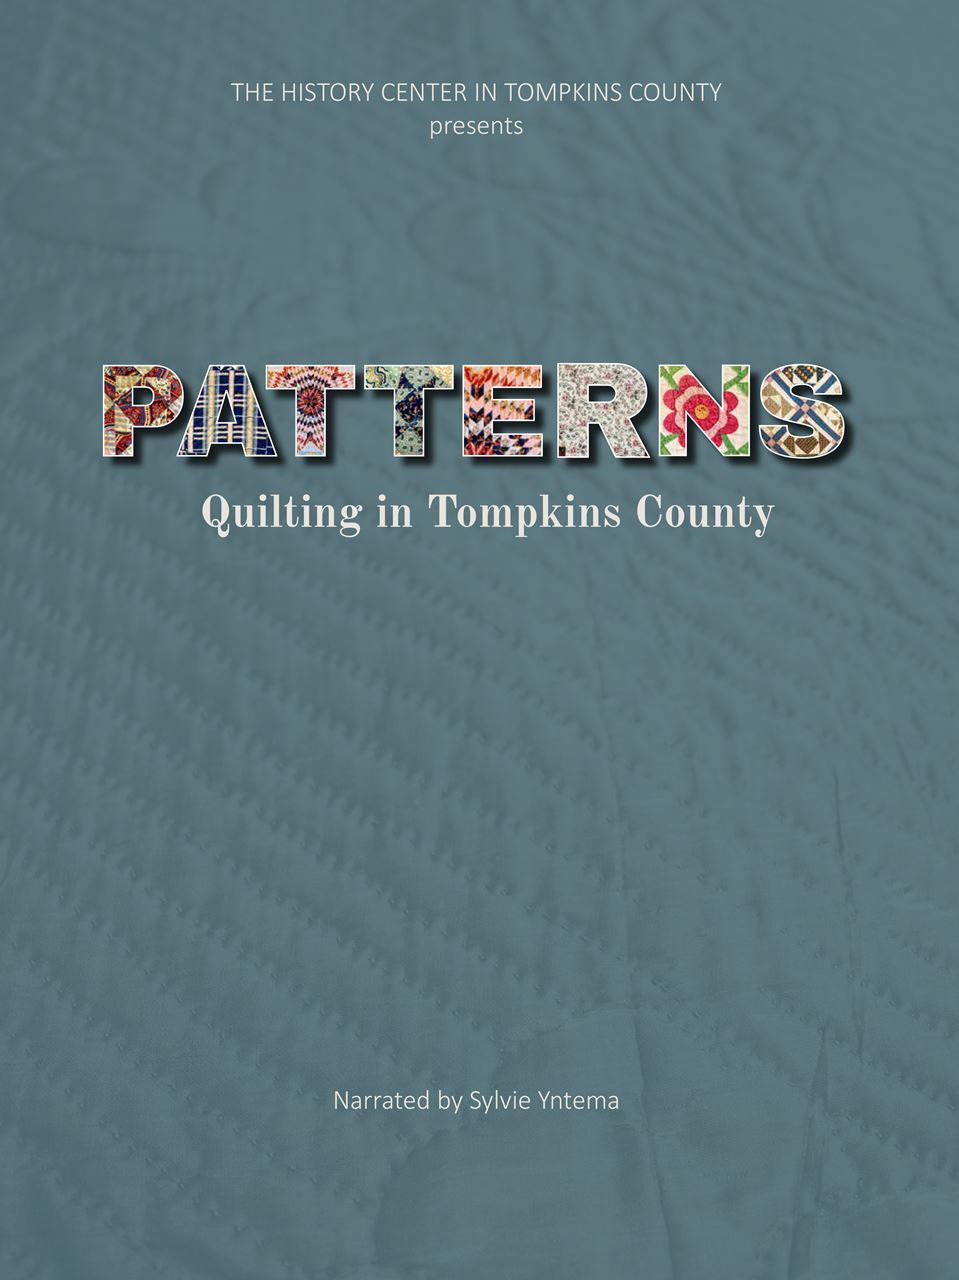 A poster that says "THE HISTORY CENTER IN TOMPKINS COUNTY presents PATTERNS Quilting in Tompkins County Narrated by Slyvie Yntema"